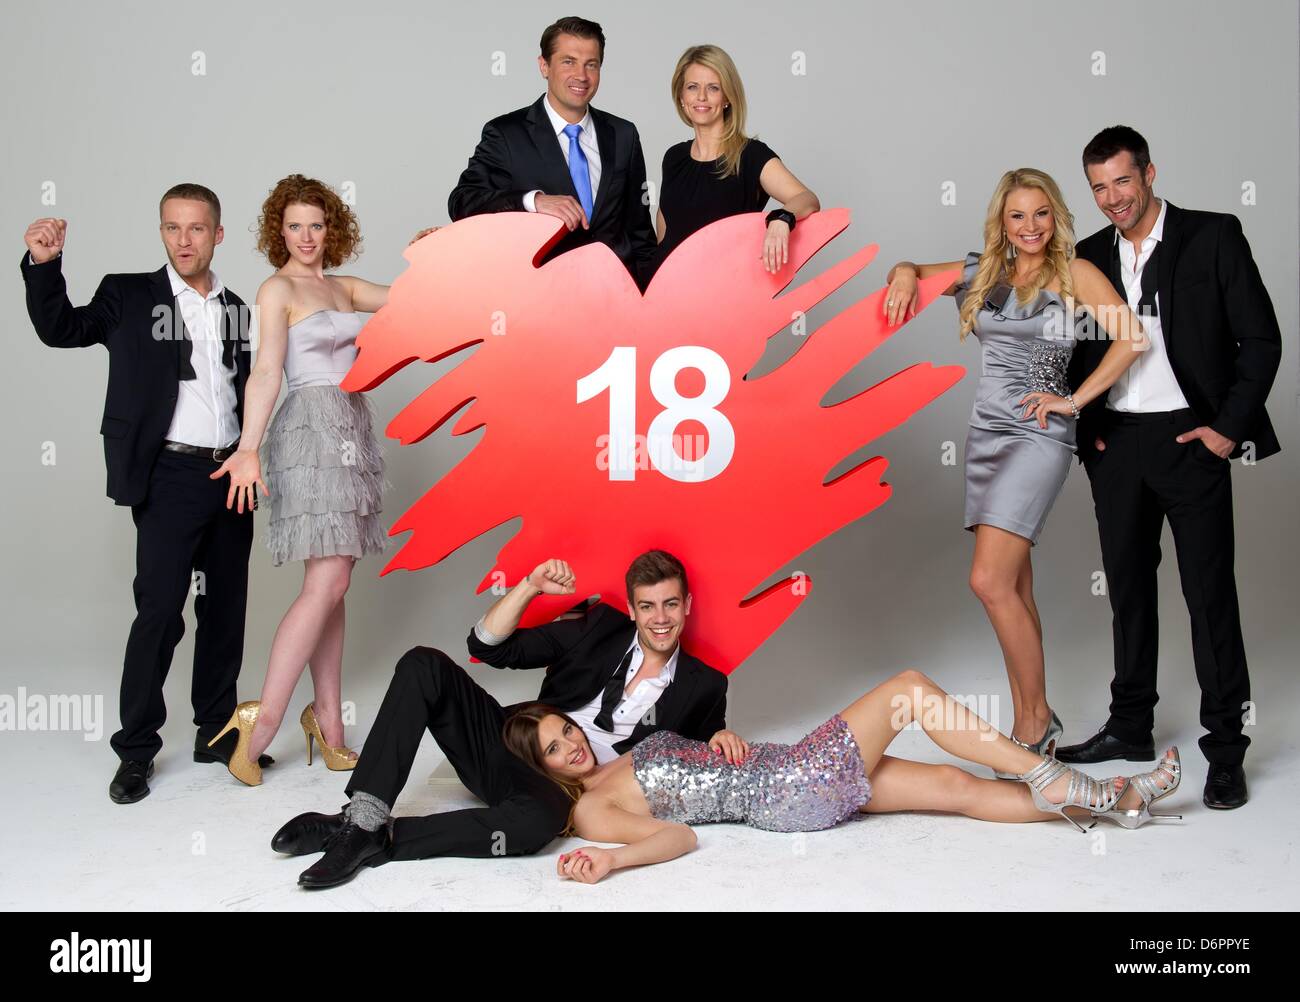 Actors  Dominic Saleh-Zaki (L-R, as Andi Fritzsche), Janina Isabell Batoly (as Bella Jacob), Wolfram Grandezka (above, as Ansgar von Lahnstein), Miriam Lahnstein (as Tanja von Lahnstein), Florian Wünsche (below, as Emilio Sanchez), Nicole Mieth (as Kim Wolf), Jana Julia Kilka (as Jessica Stiehl) and Jo Weil (as Oliver Sabel) from the German soap opera 'Verbotene Liebe' (lit: forbidden love) pose for photographer in Hamburg, Germany, 22 April 2013. The series is celebrating its 18th birthday in 2013. Photo: Sven Hoppe Stock Photo